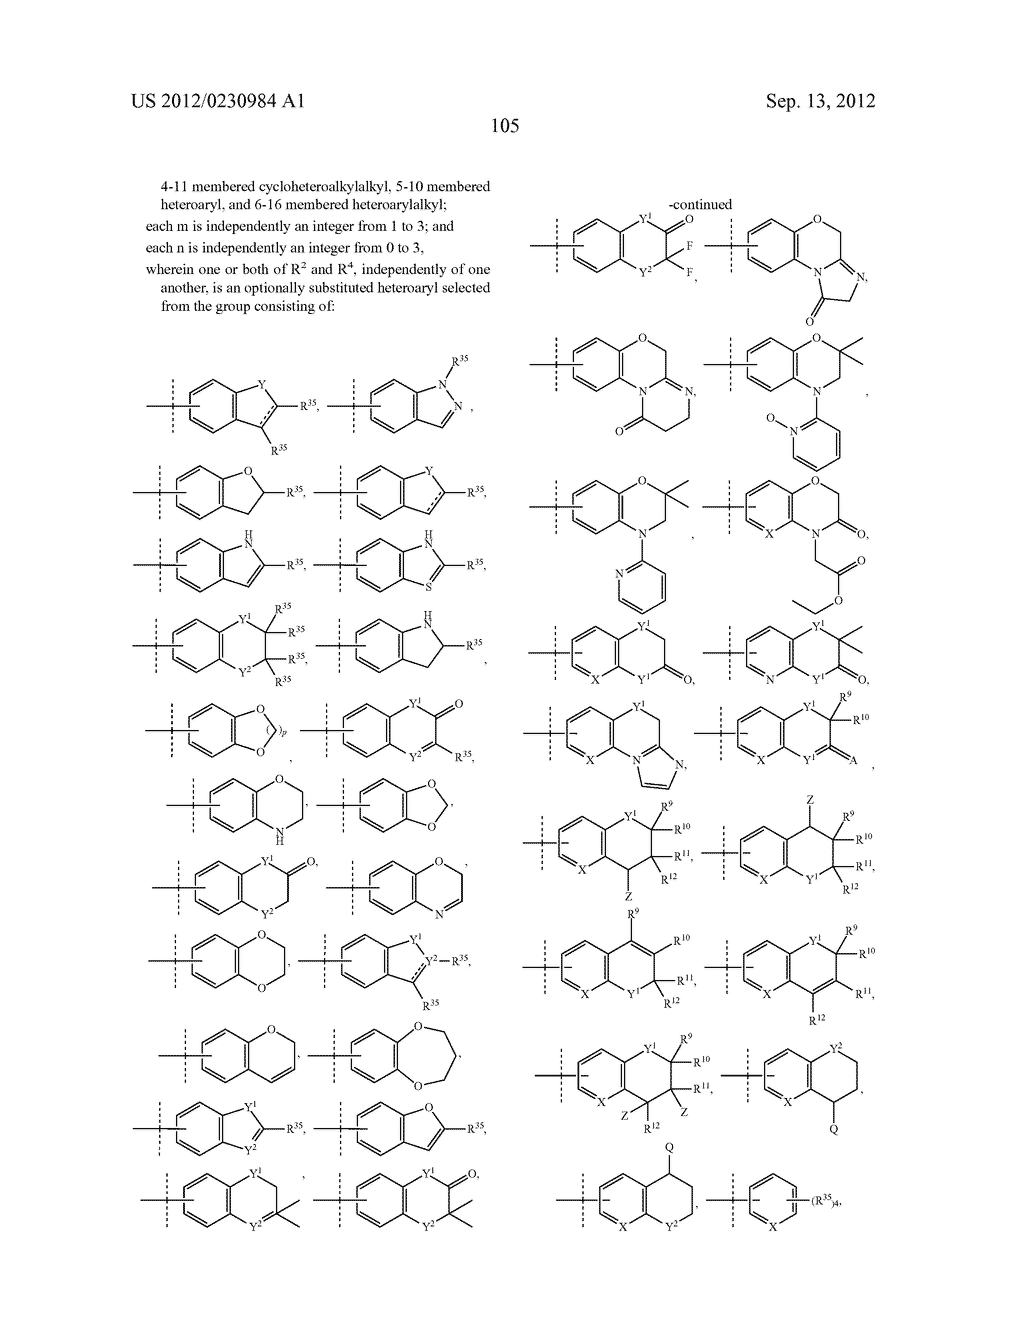 Methods of Treating or Preventing Autoimmune Diseases With     2,4-Pyrimidinediamine Compounds - diagram, schematic, and image 125